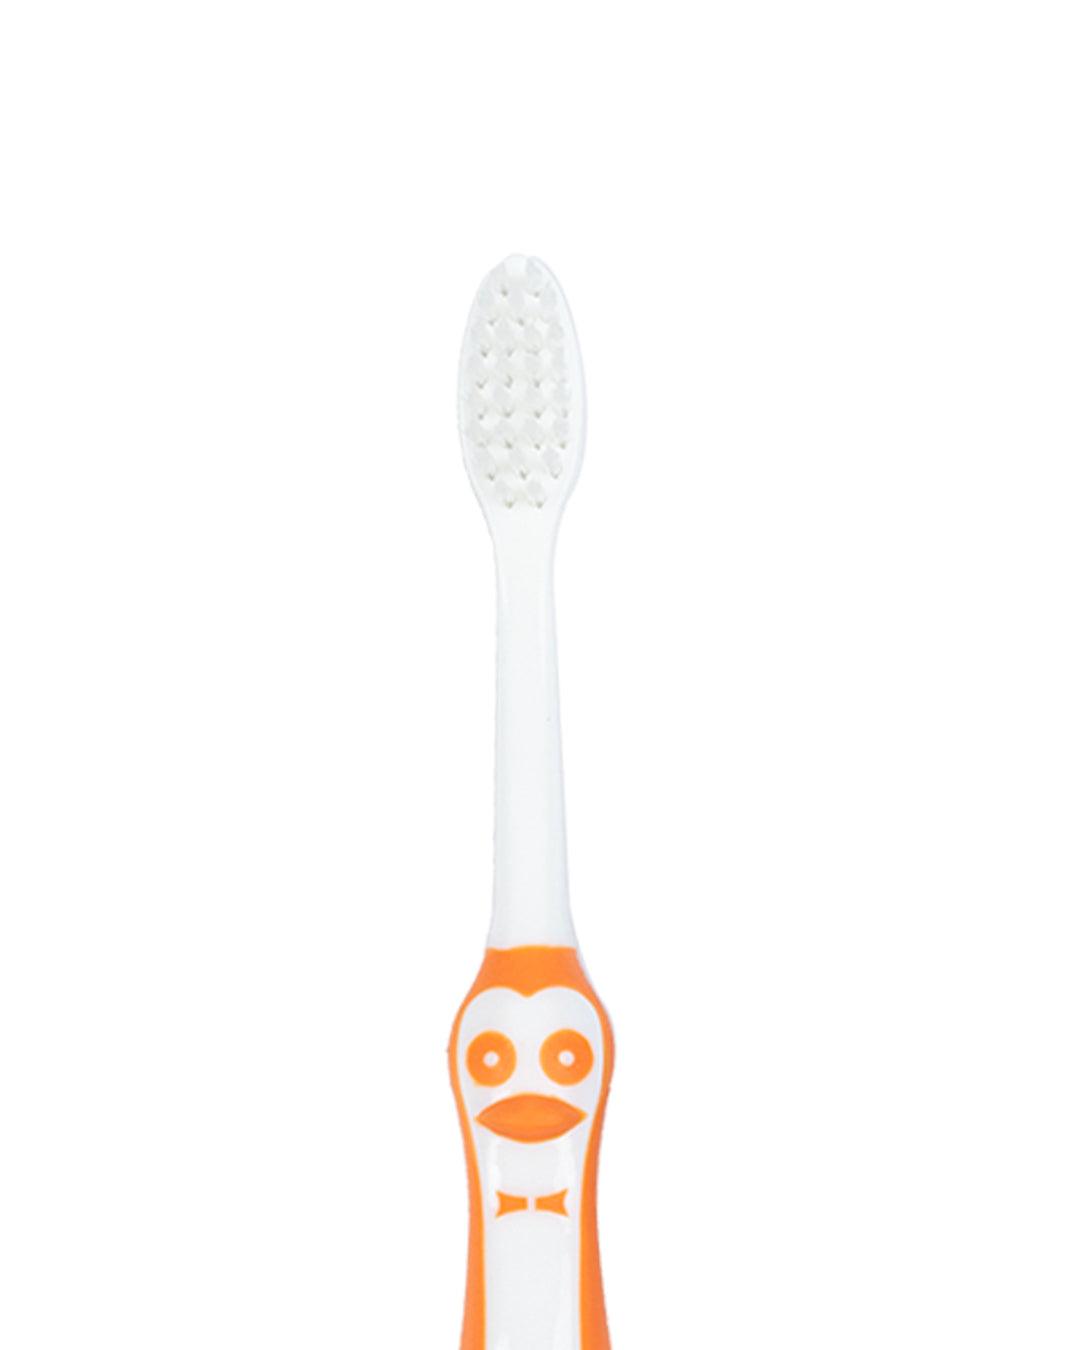 Kids Toothbrush, with Kid Watch, Blue, Plastic - MARKET 99